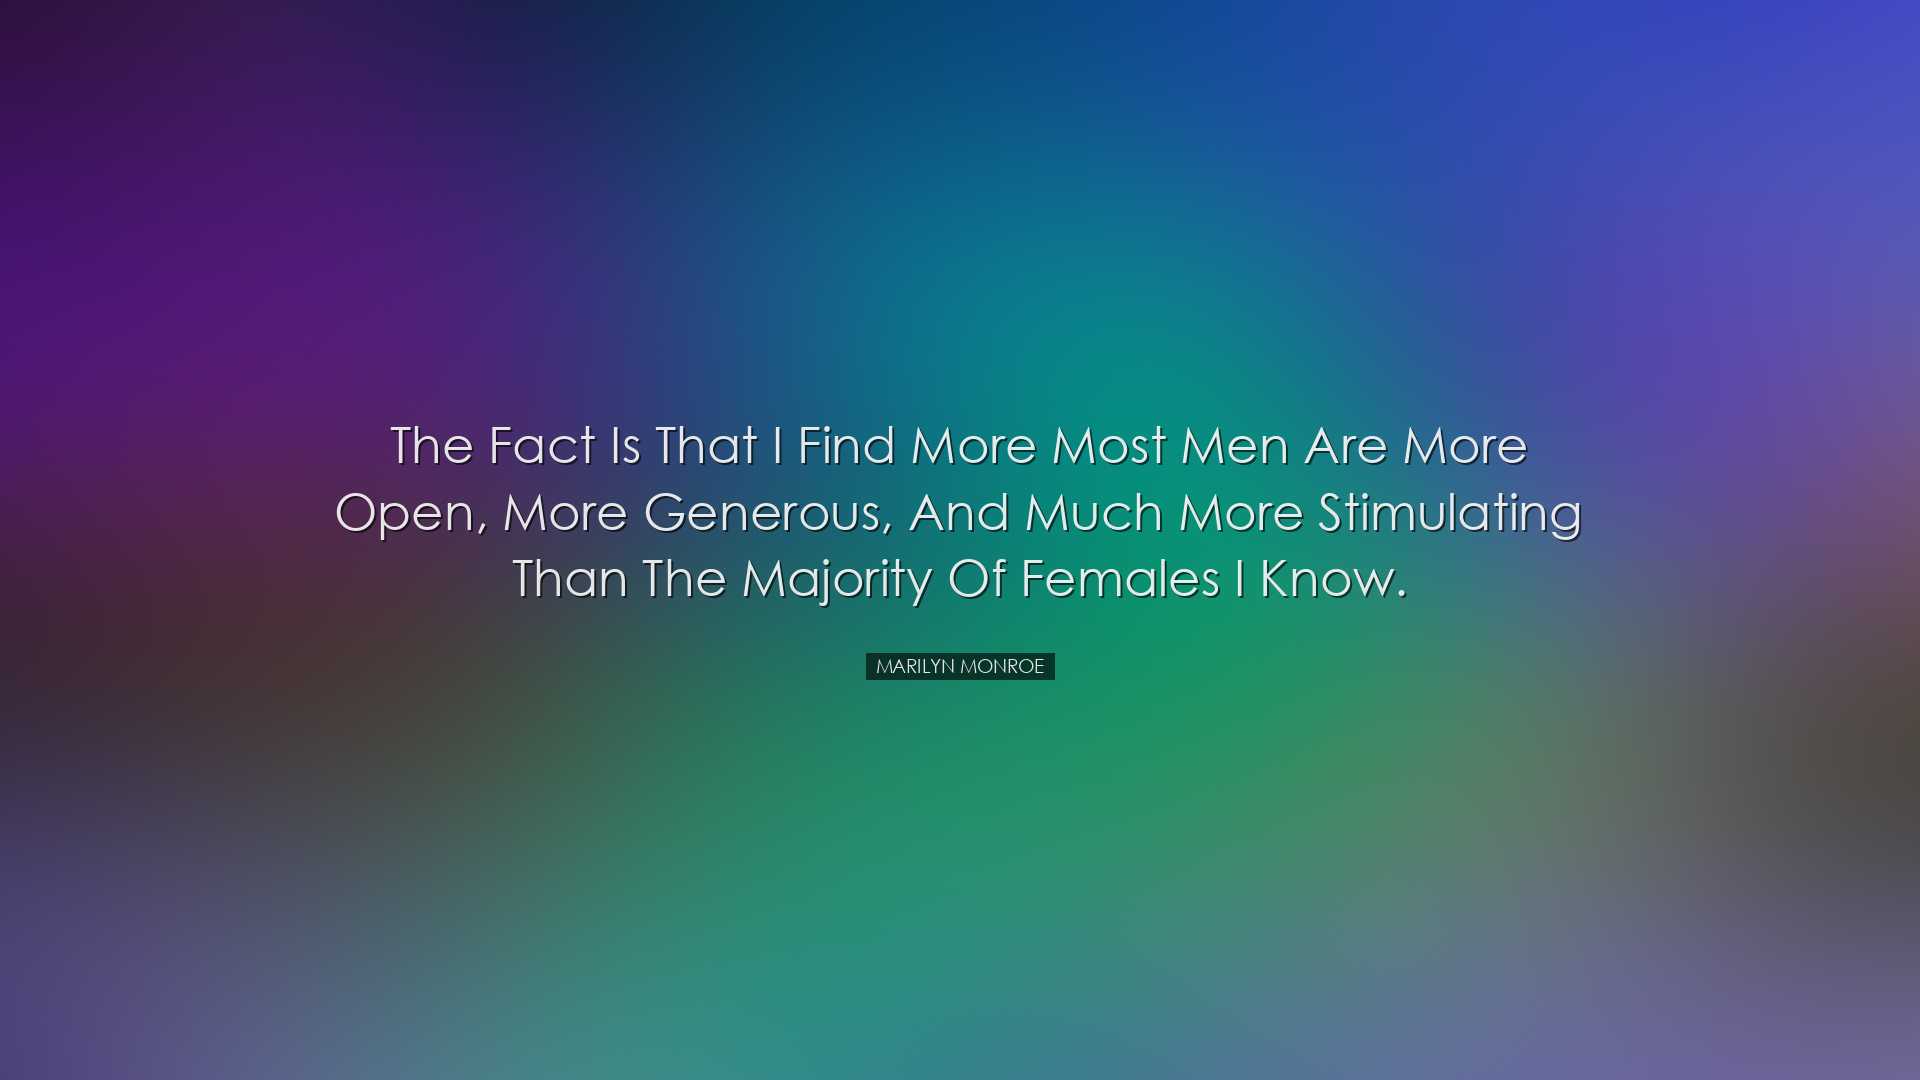 The fact is that I find more most men are more open, more generous